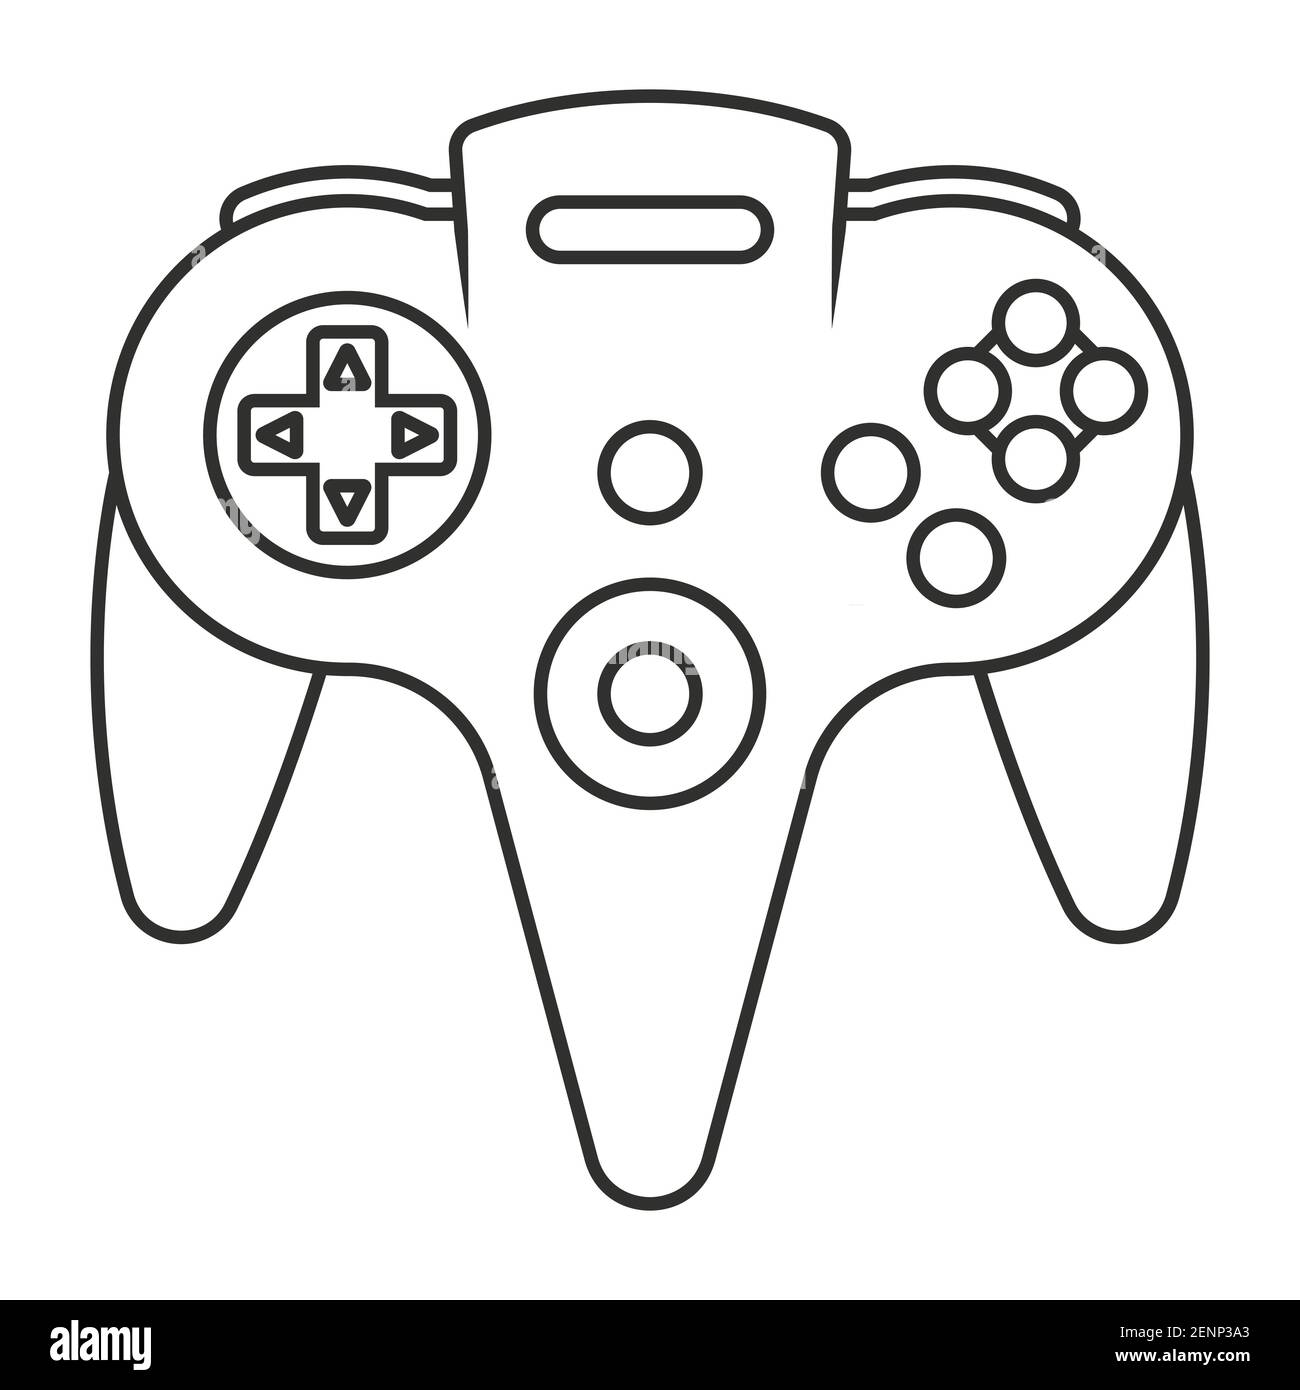 N64 or gamecube video game controller line art icon for apps or website Stock Vector